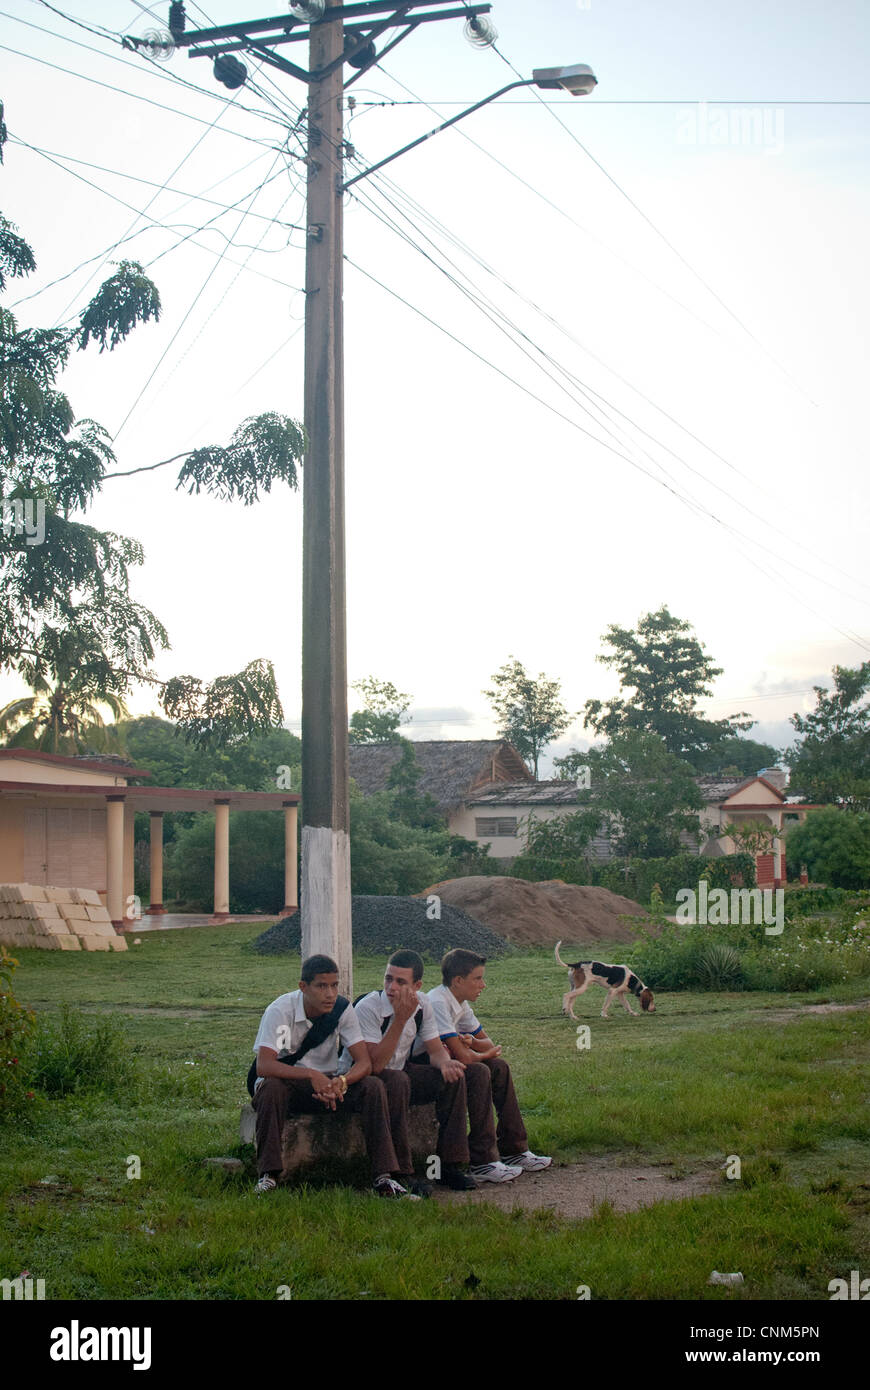 3 Cuban boys are waiting for a bus to school at dusk Stock Photo